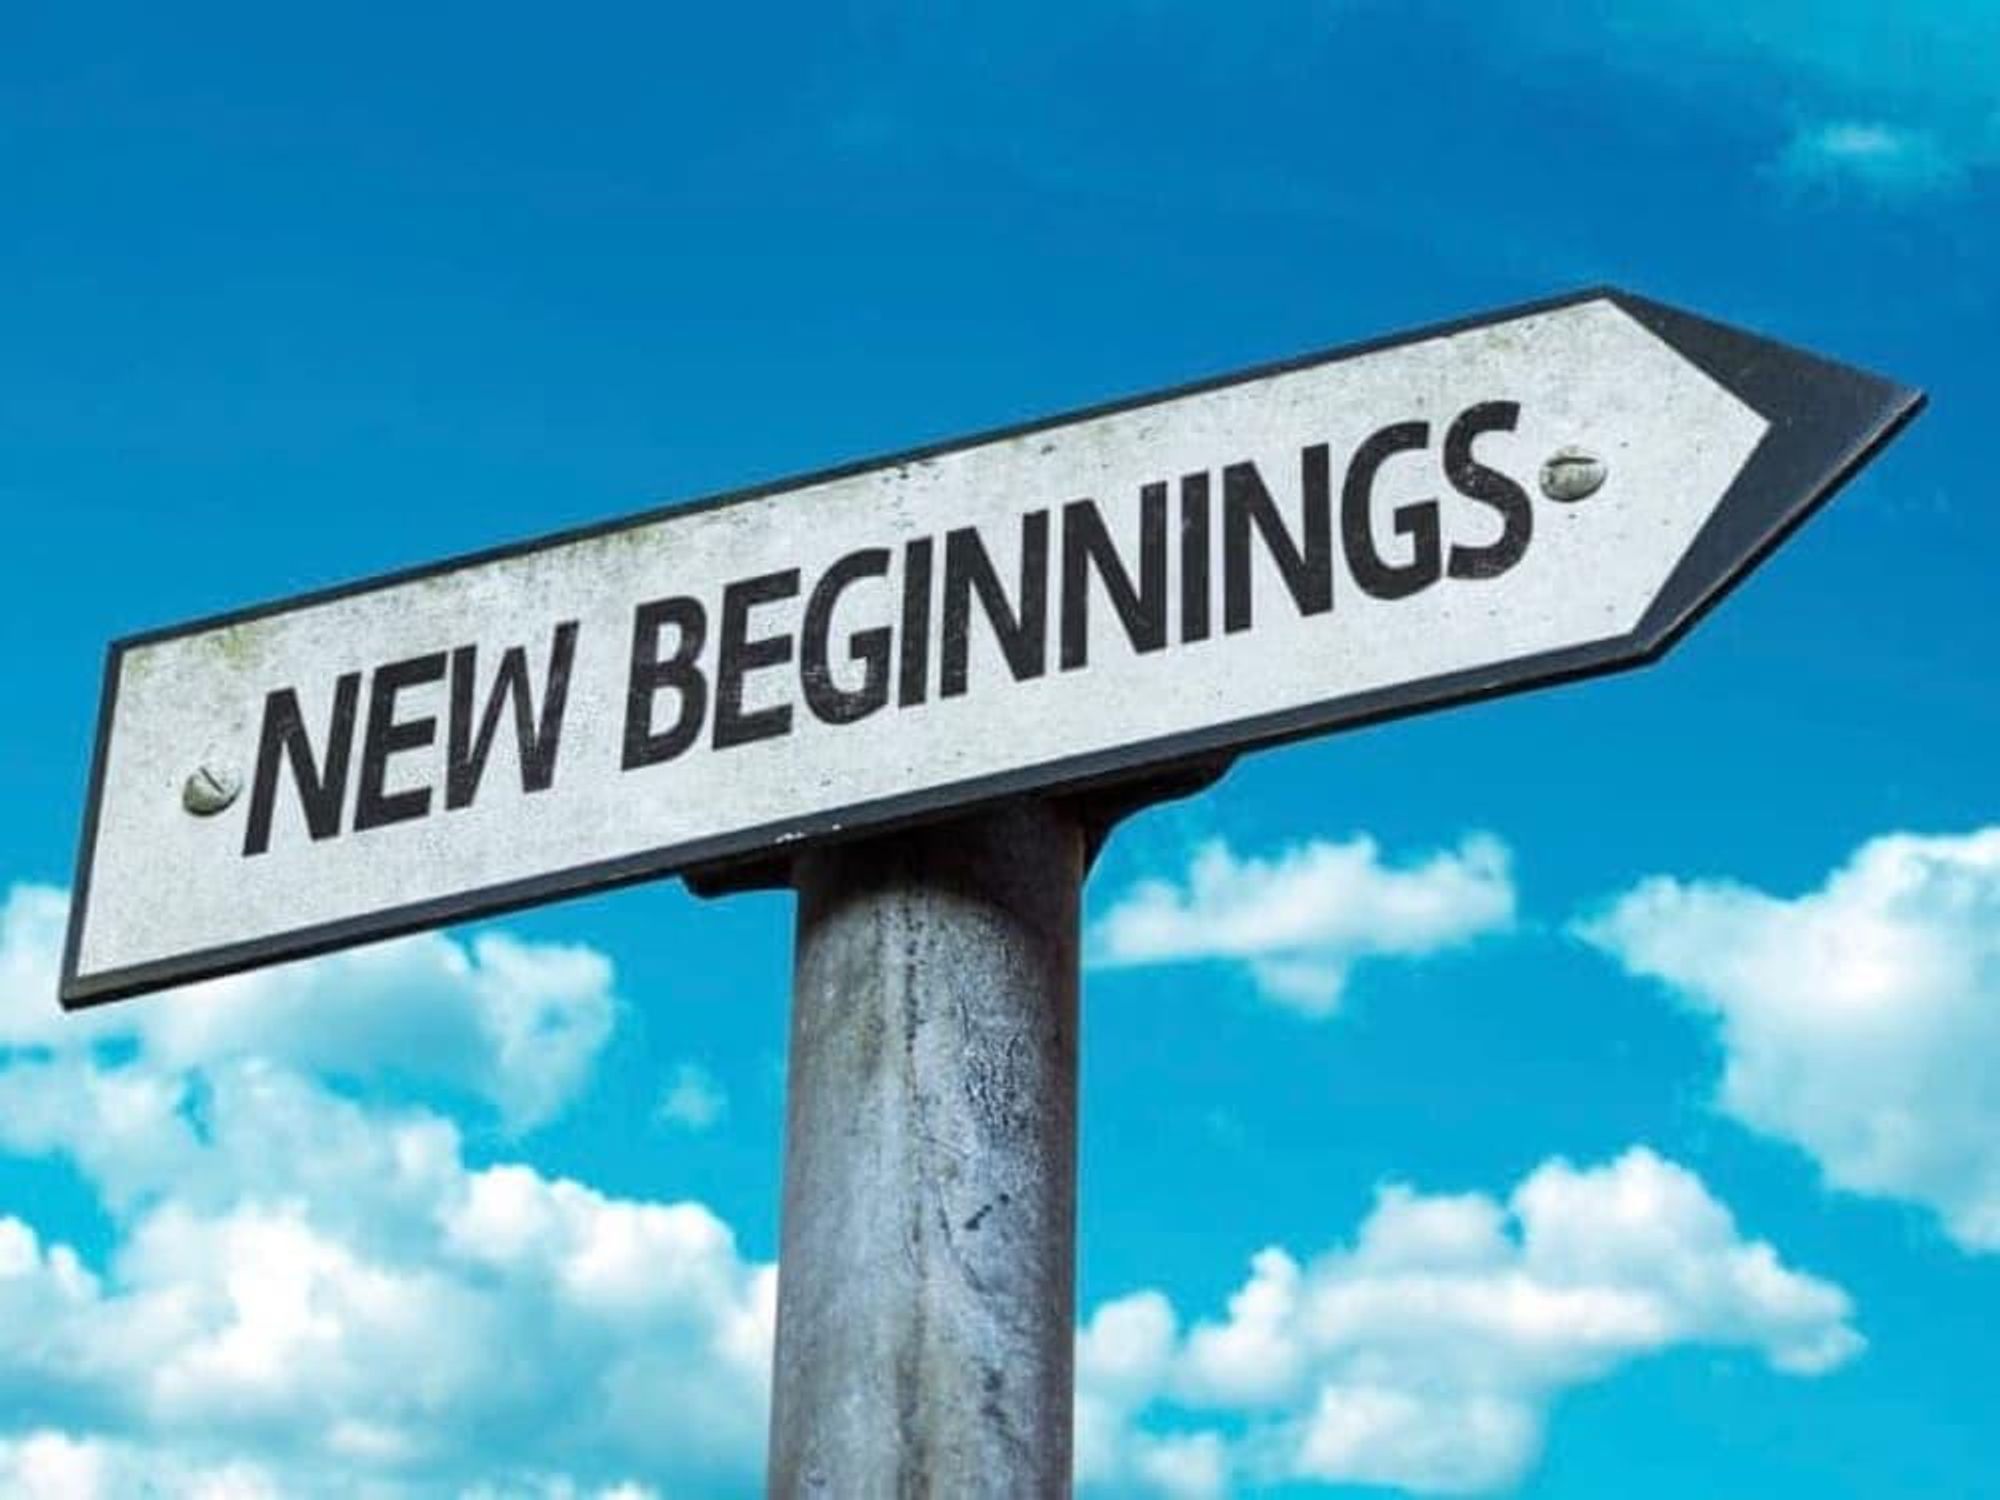 New beginnings sobriety sign